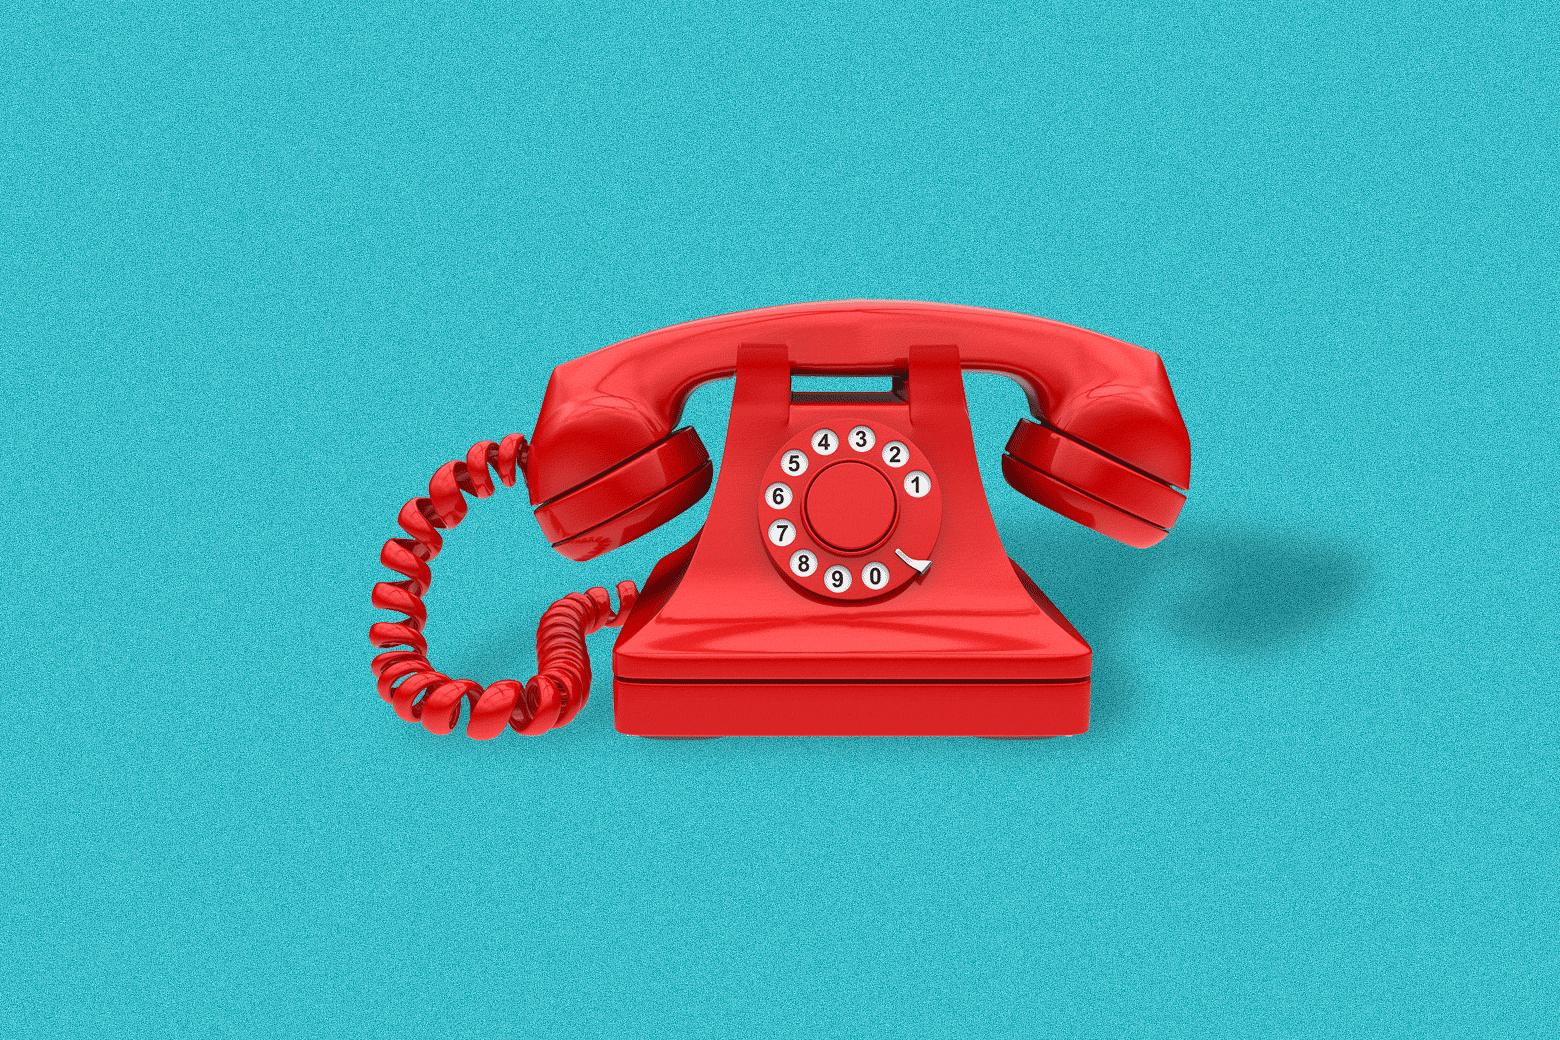 An old-fashioned red phone ringing on the hook.